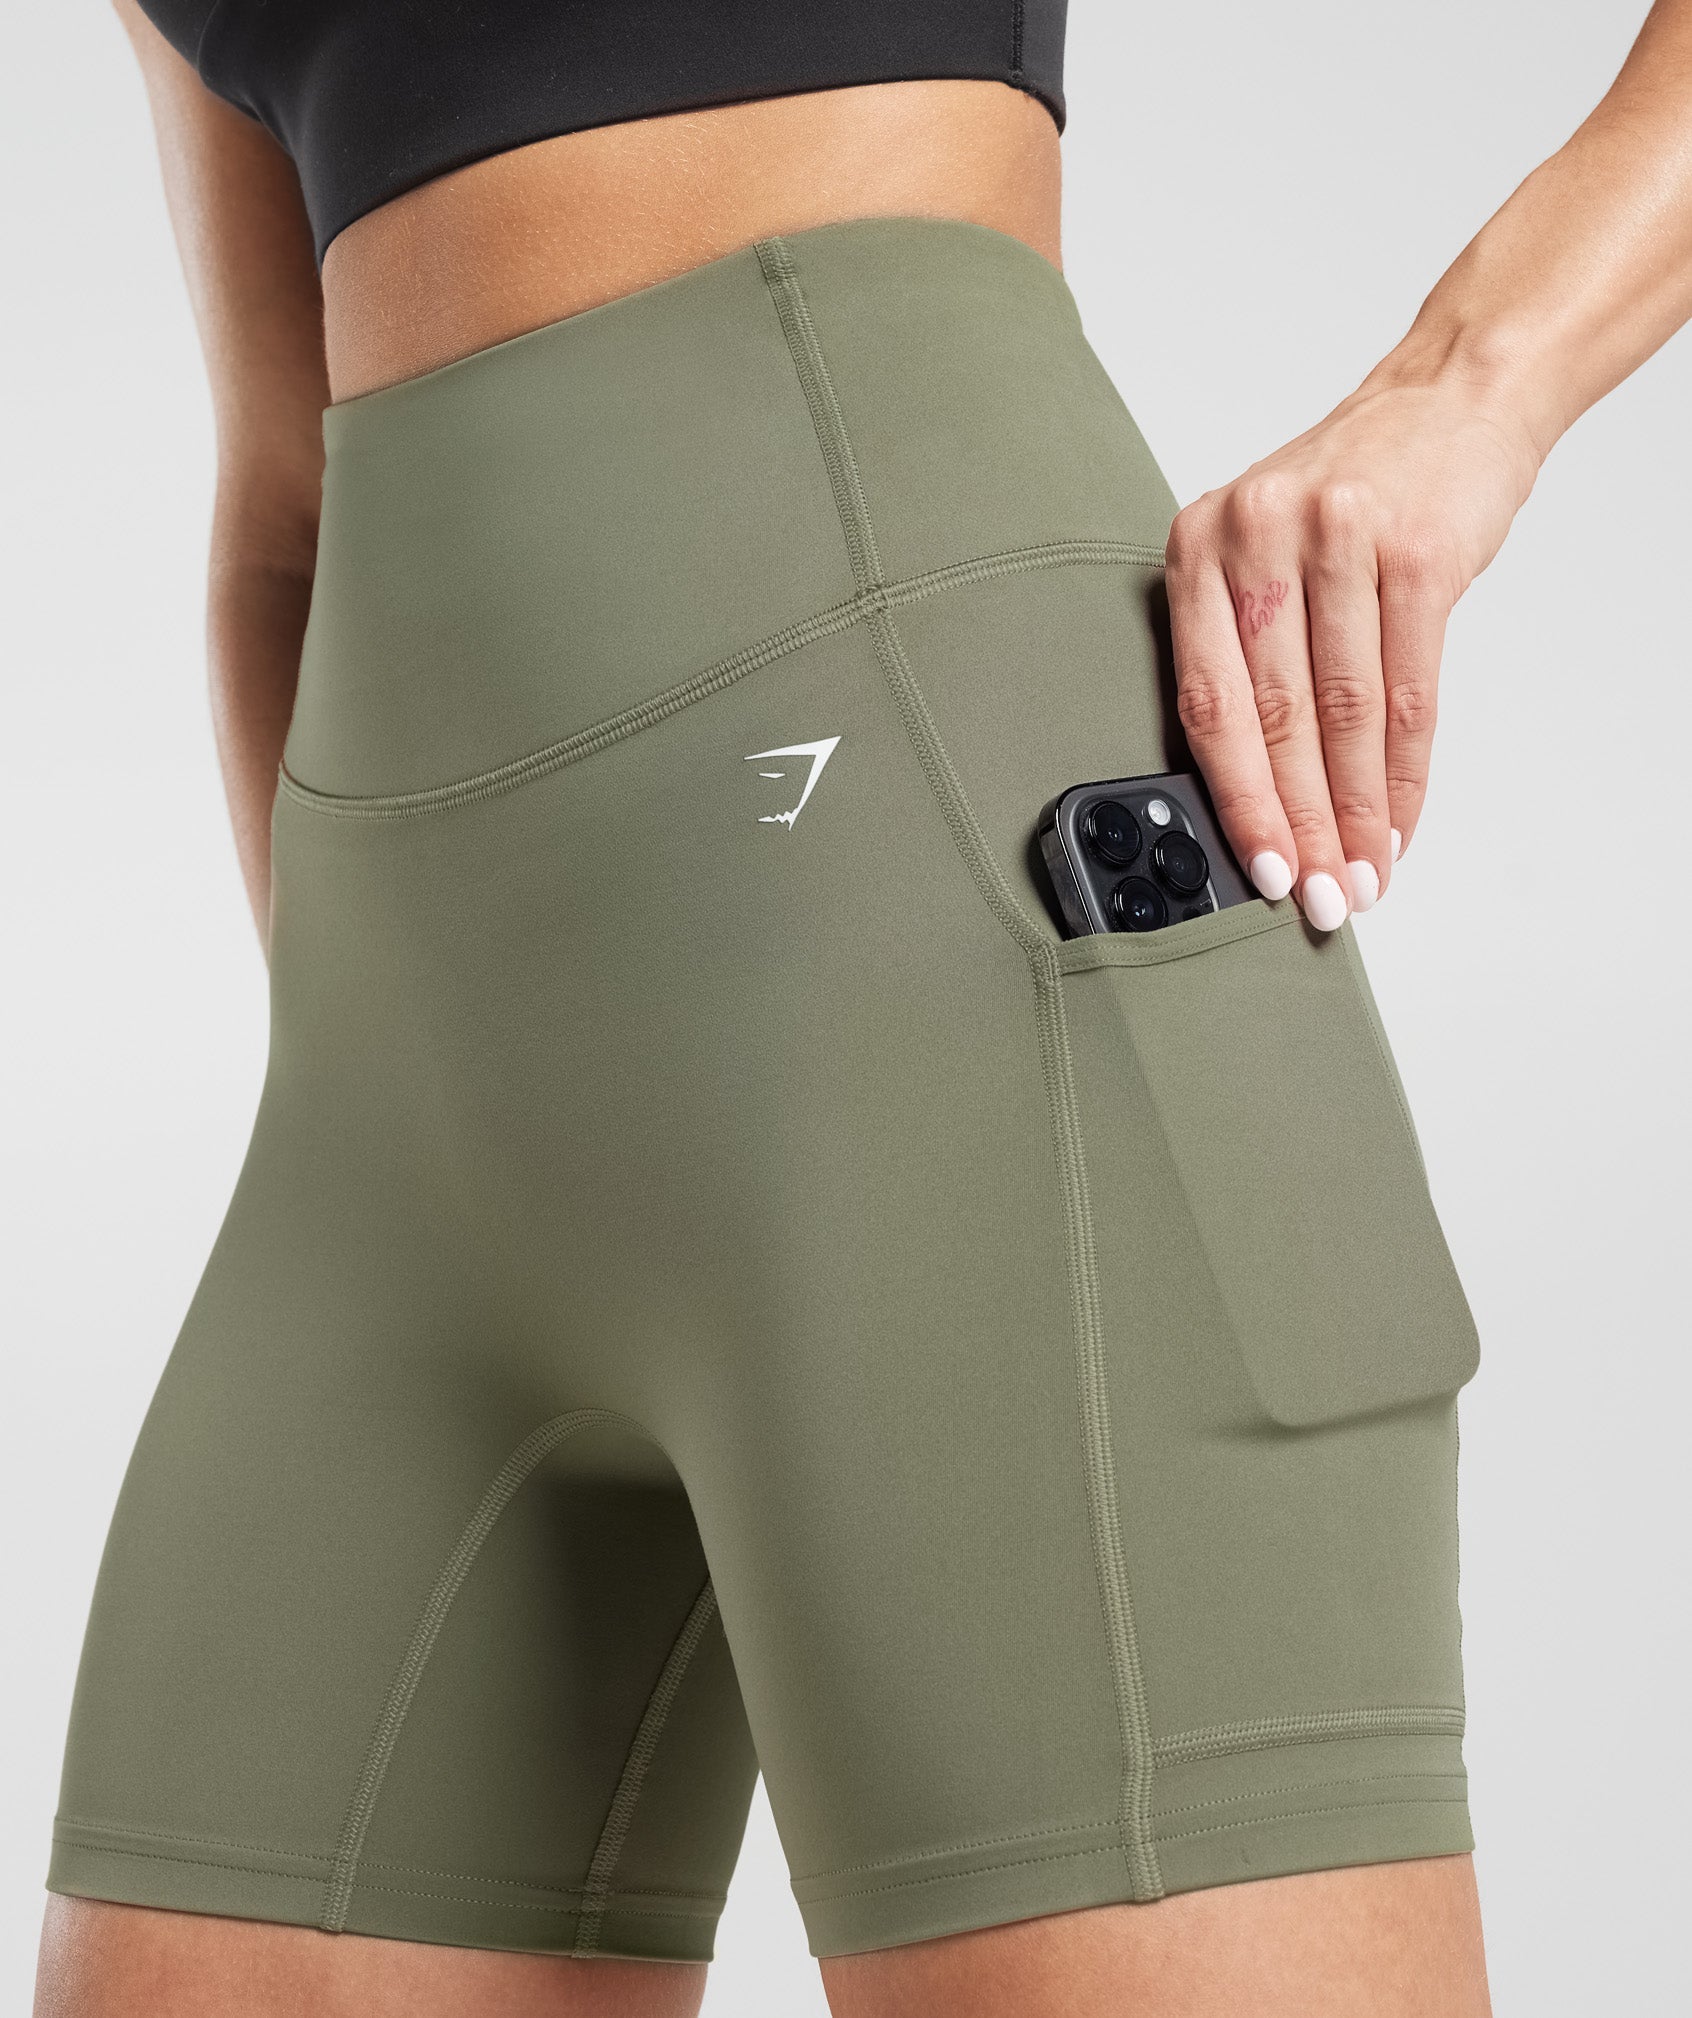 Pocket Shorts in Dusty Olive - view 5